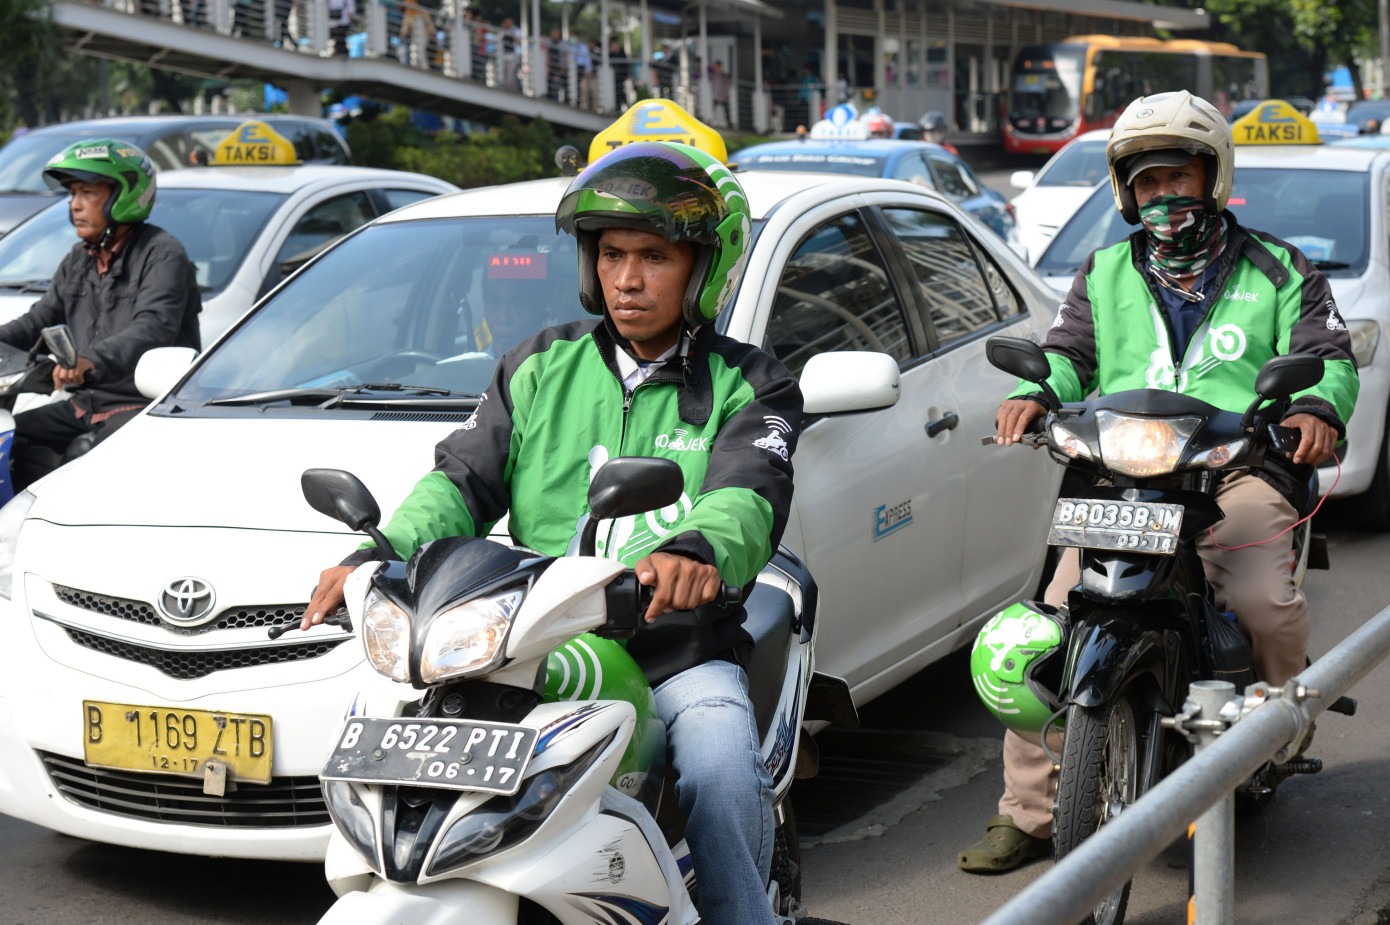 Insurance giant Allianz confirms $35M investment in Asian ride-sharing unicorn Go-Jek